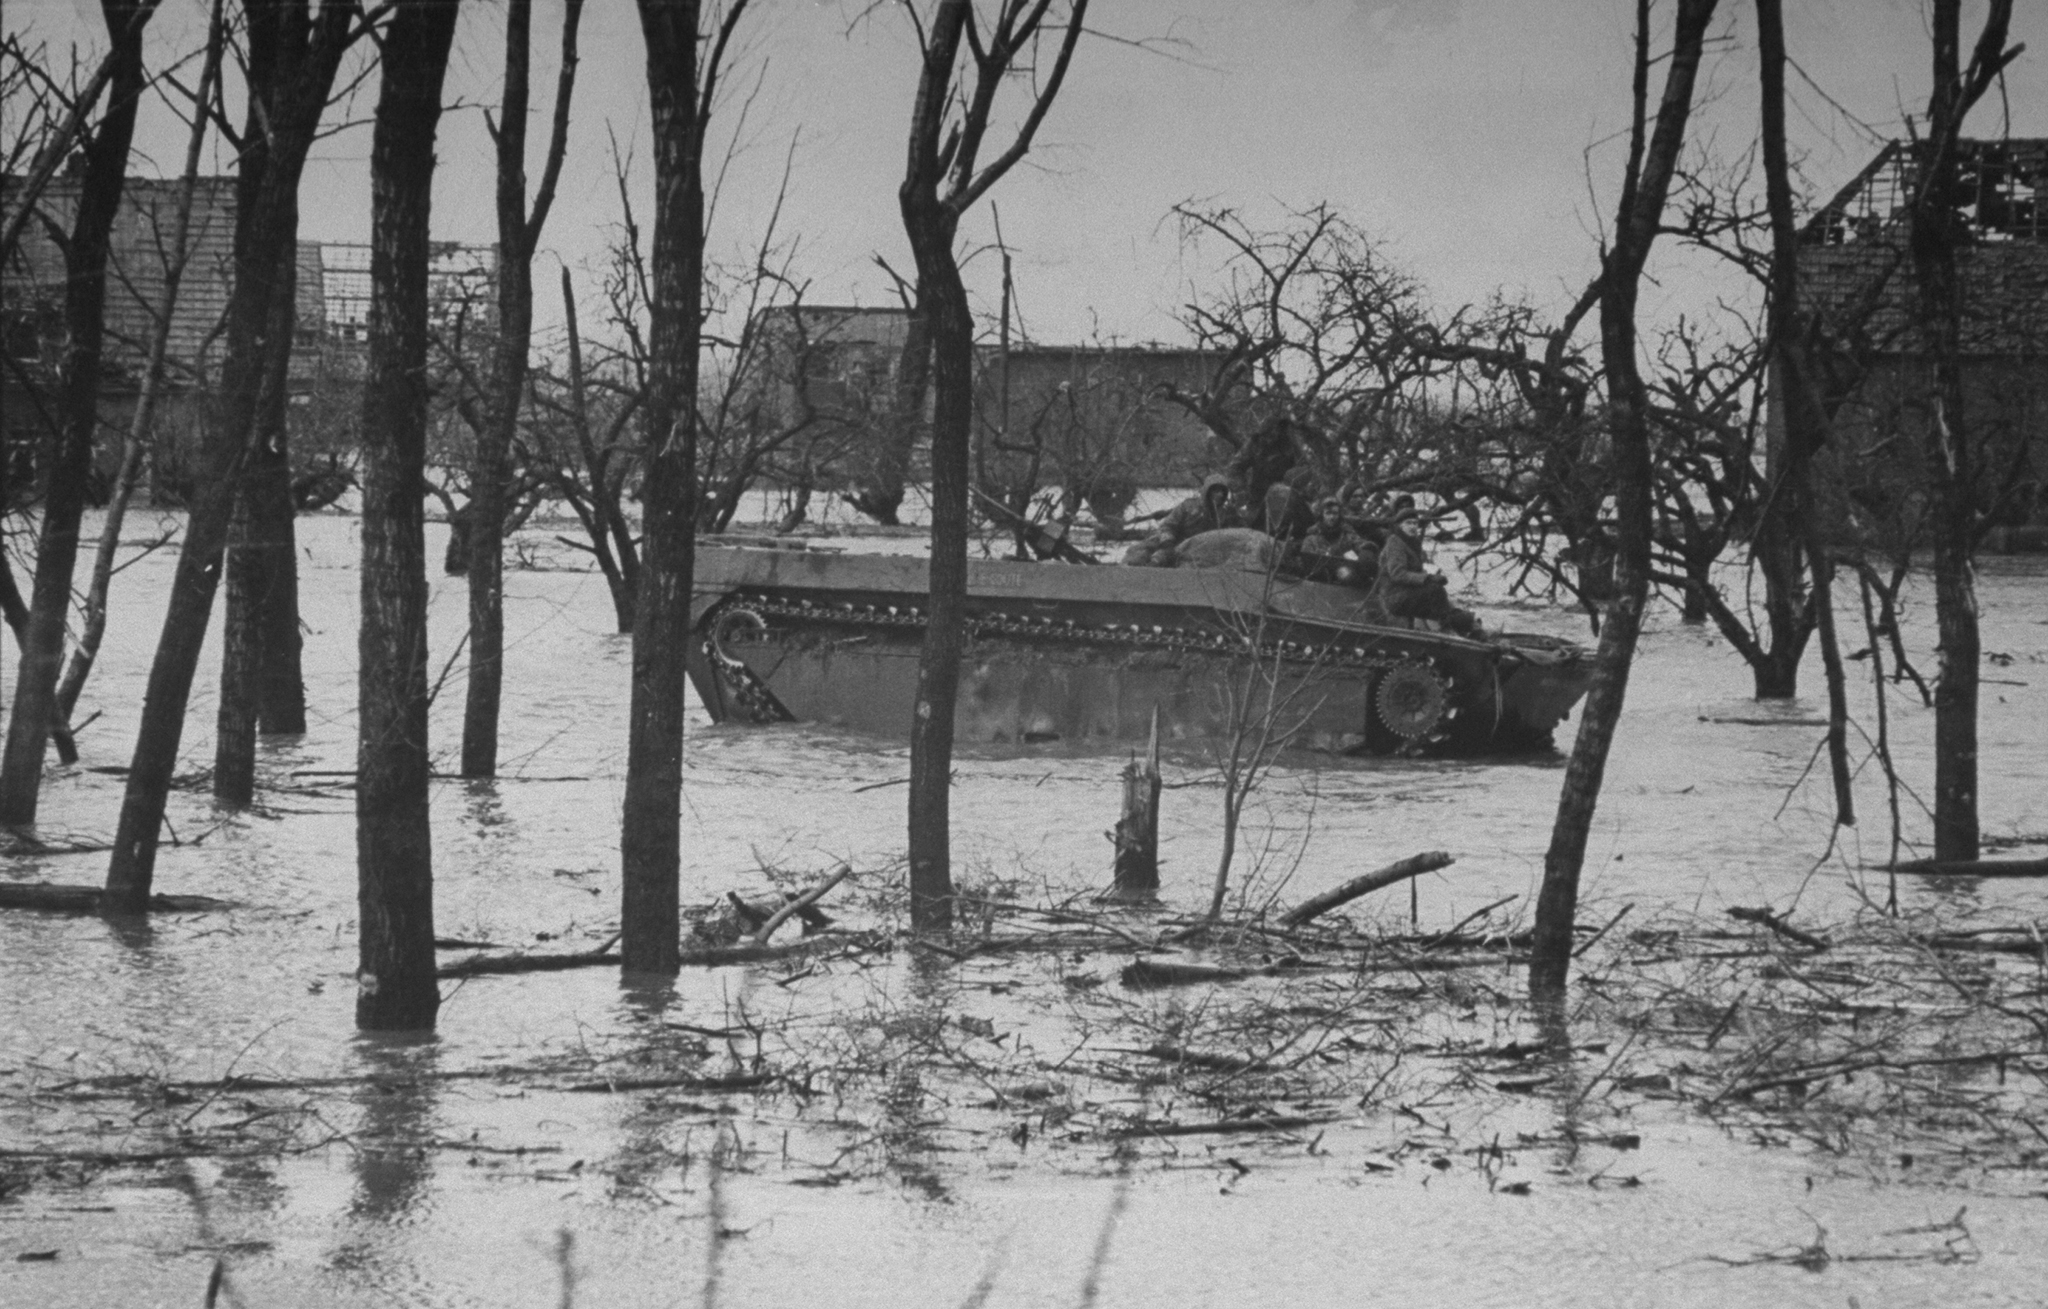 An Allied tank in flood waters unleashed by Germans, as a defensive maneuver, in the Netherlands, 1945.